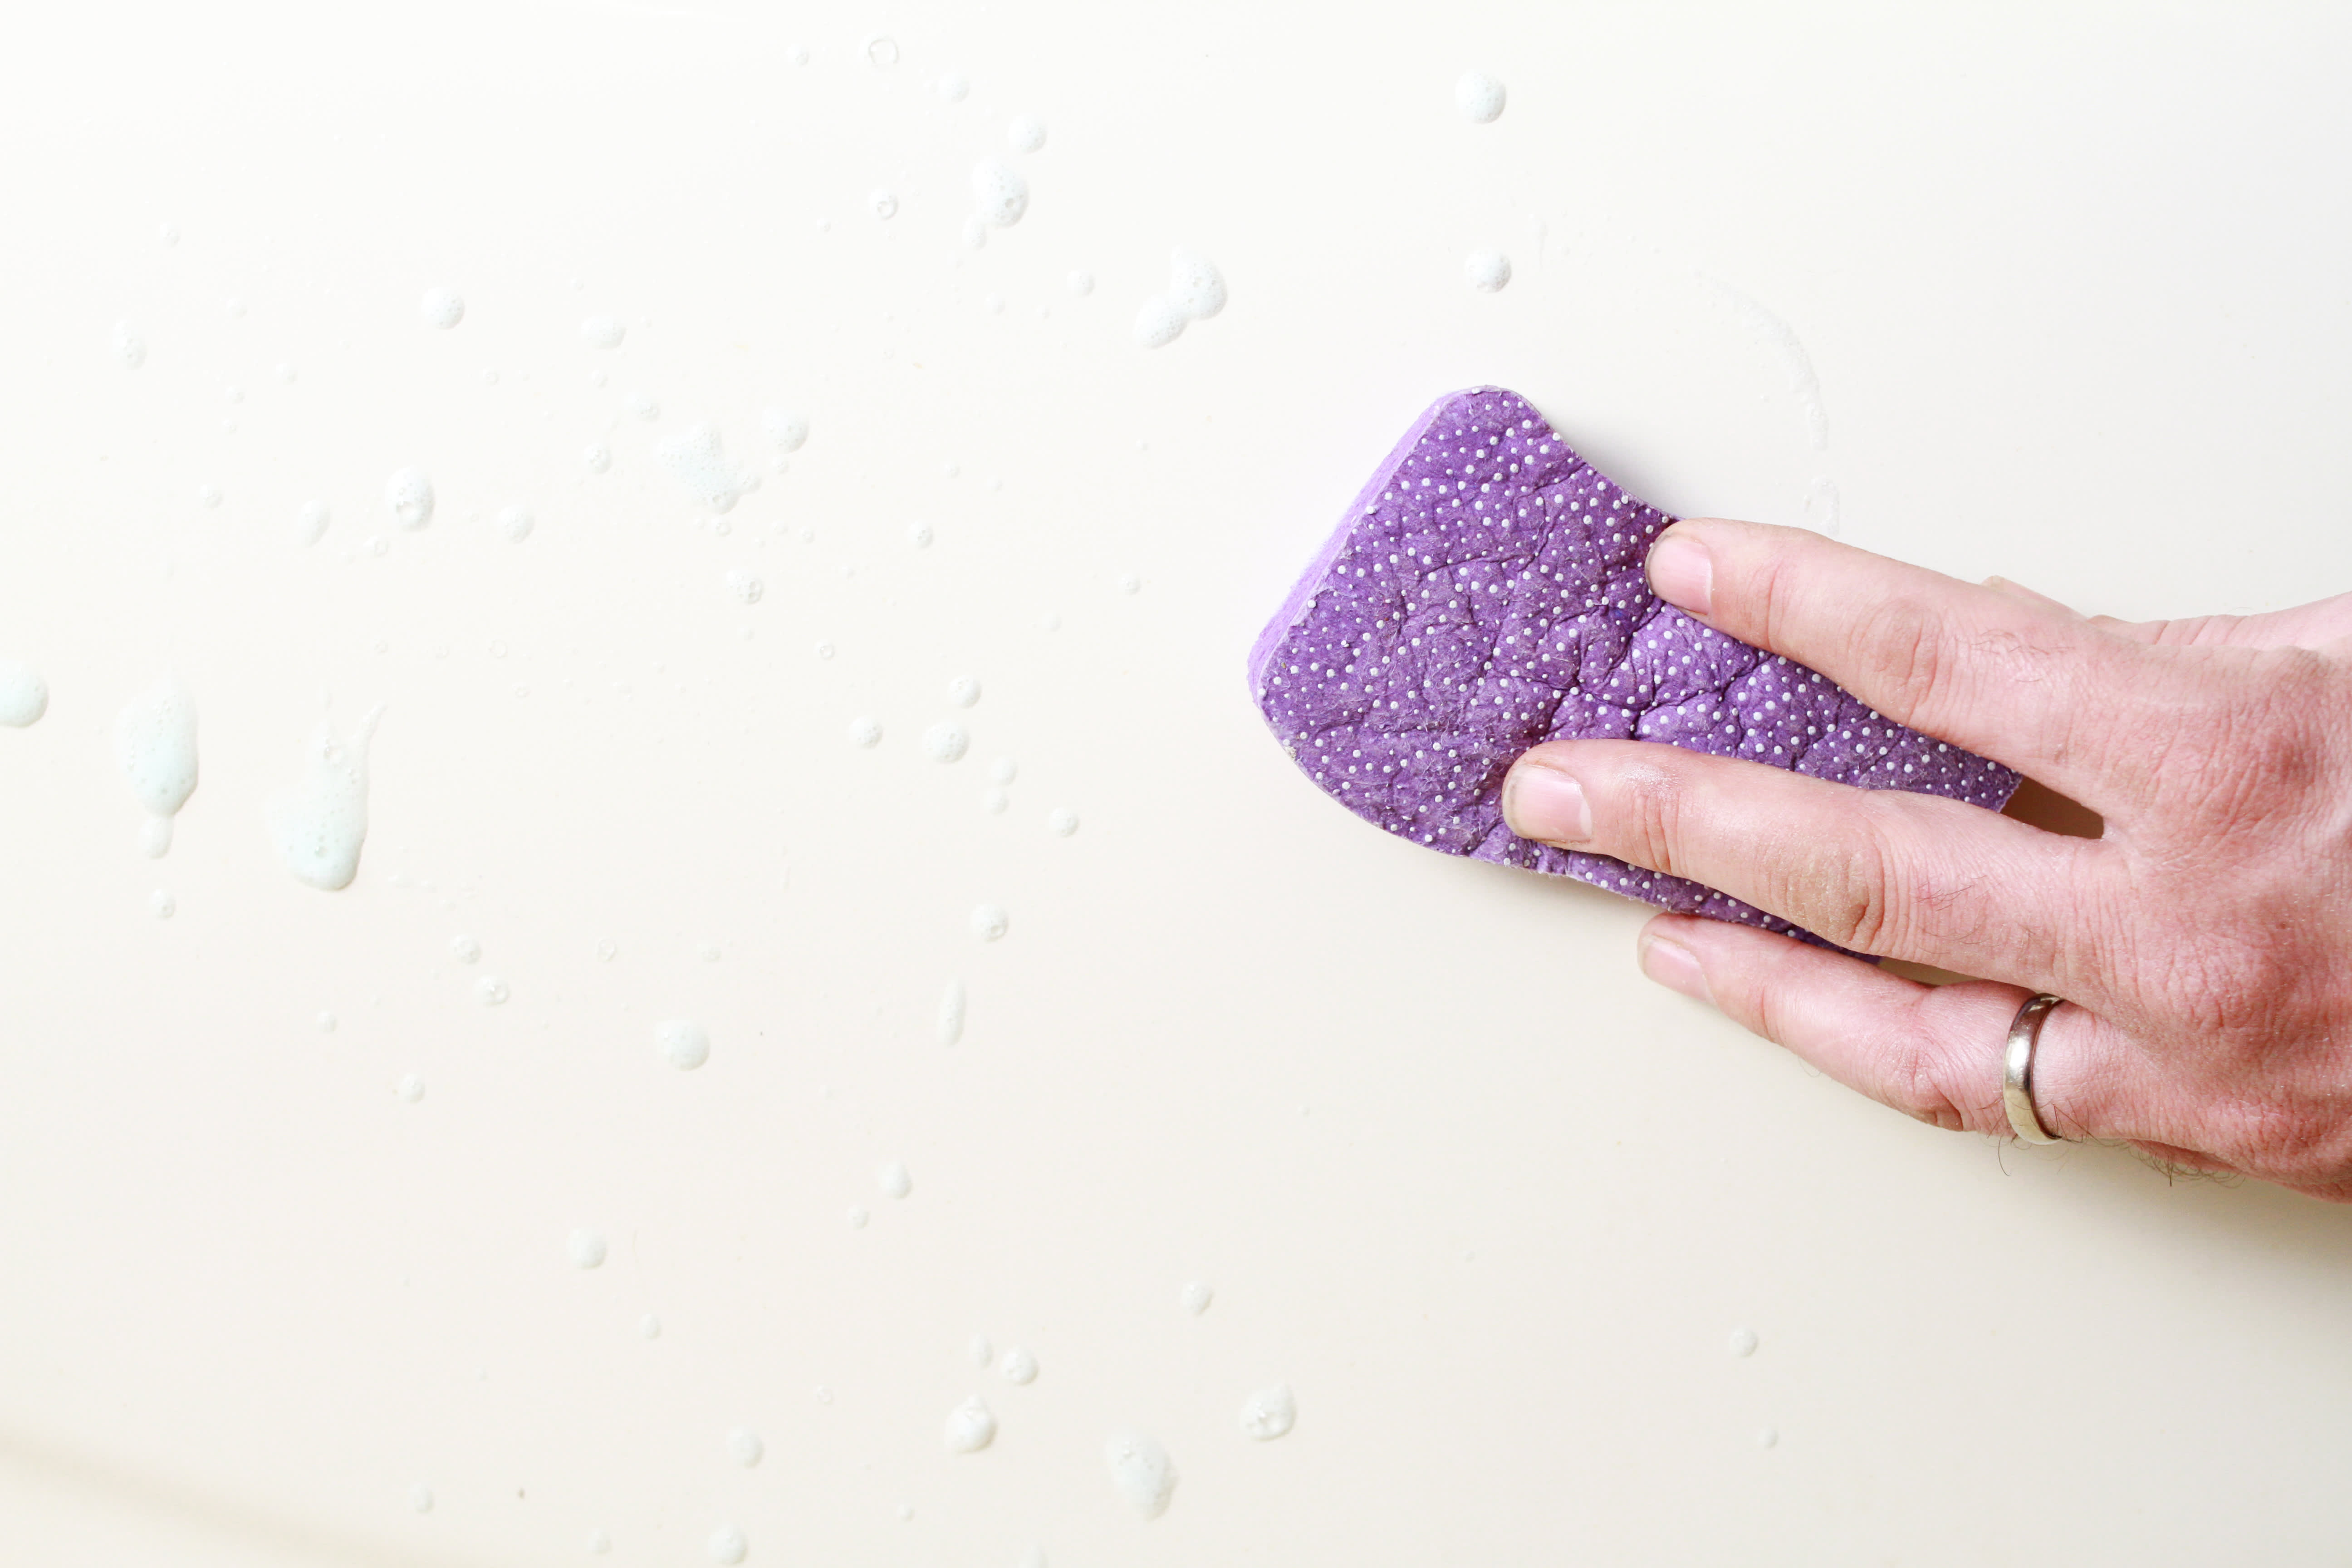 I Finally Found a Sponge That Doesn't Totally Gross Me Out